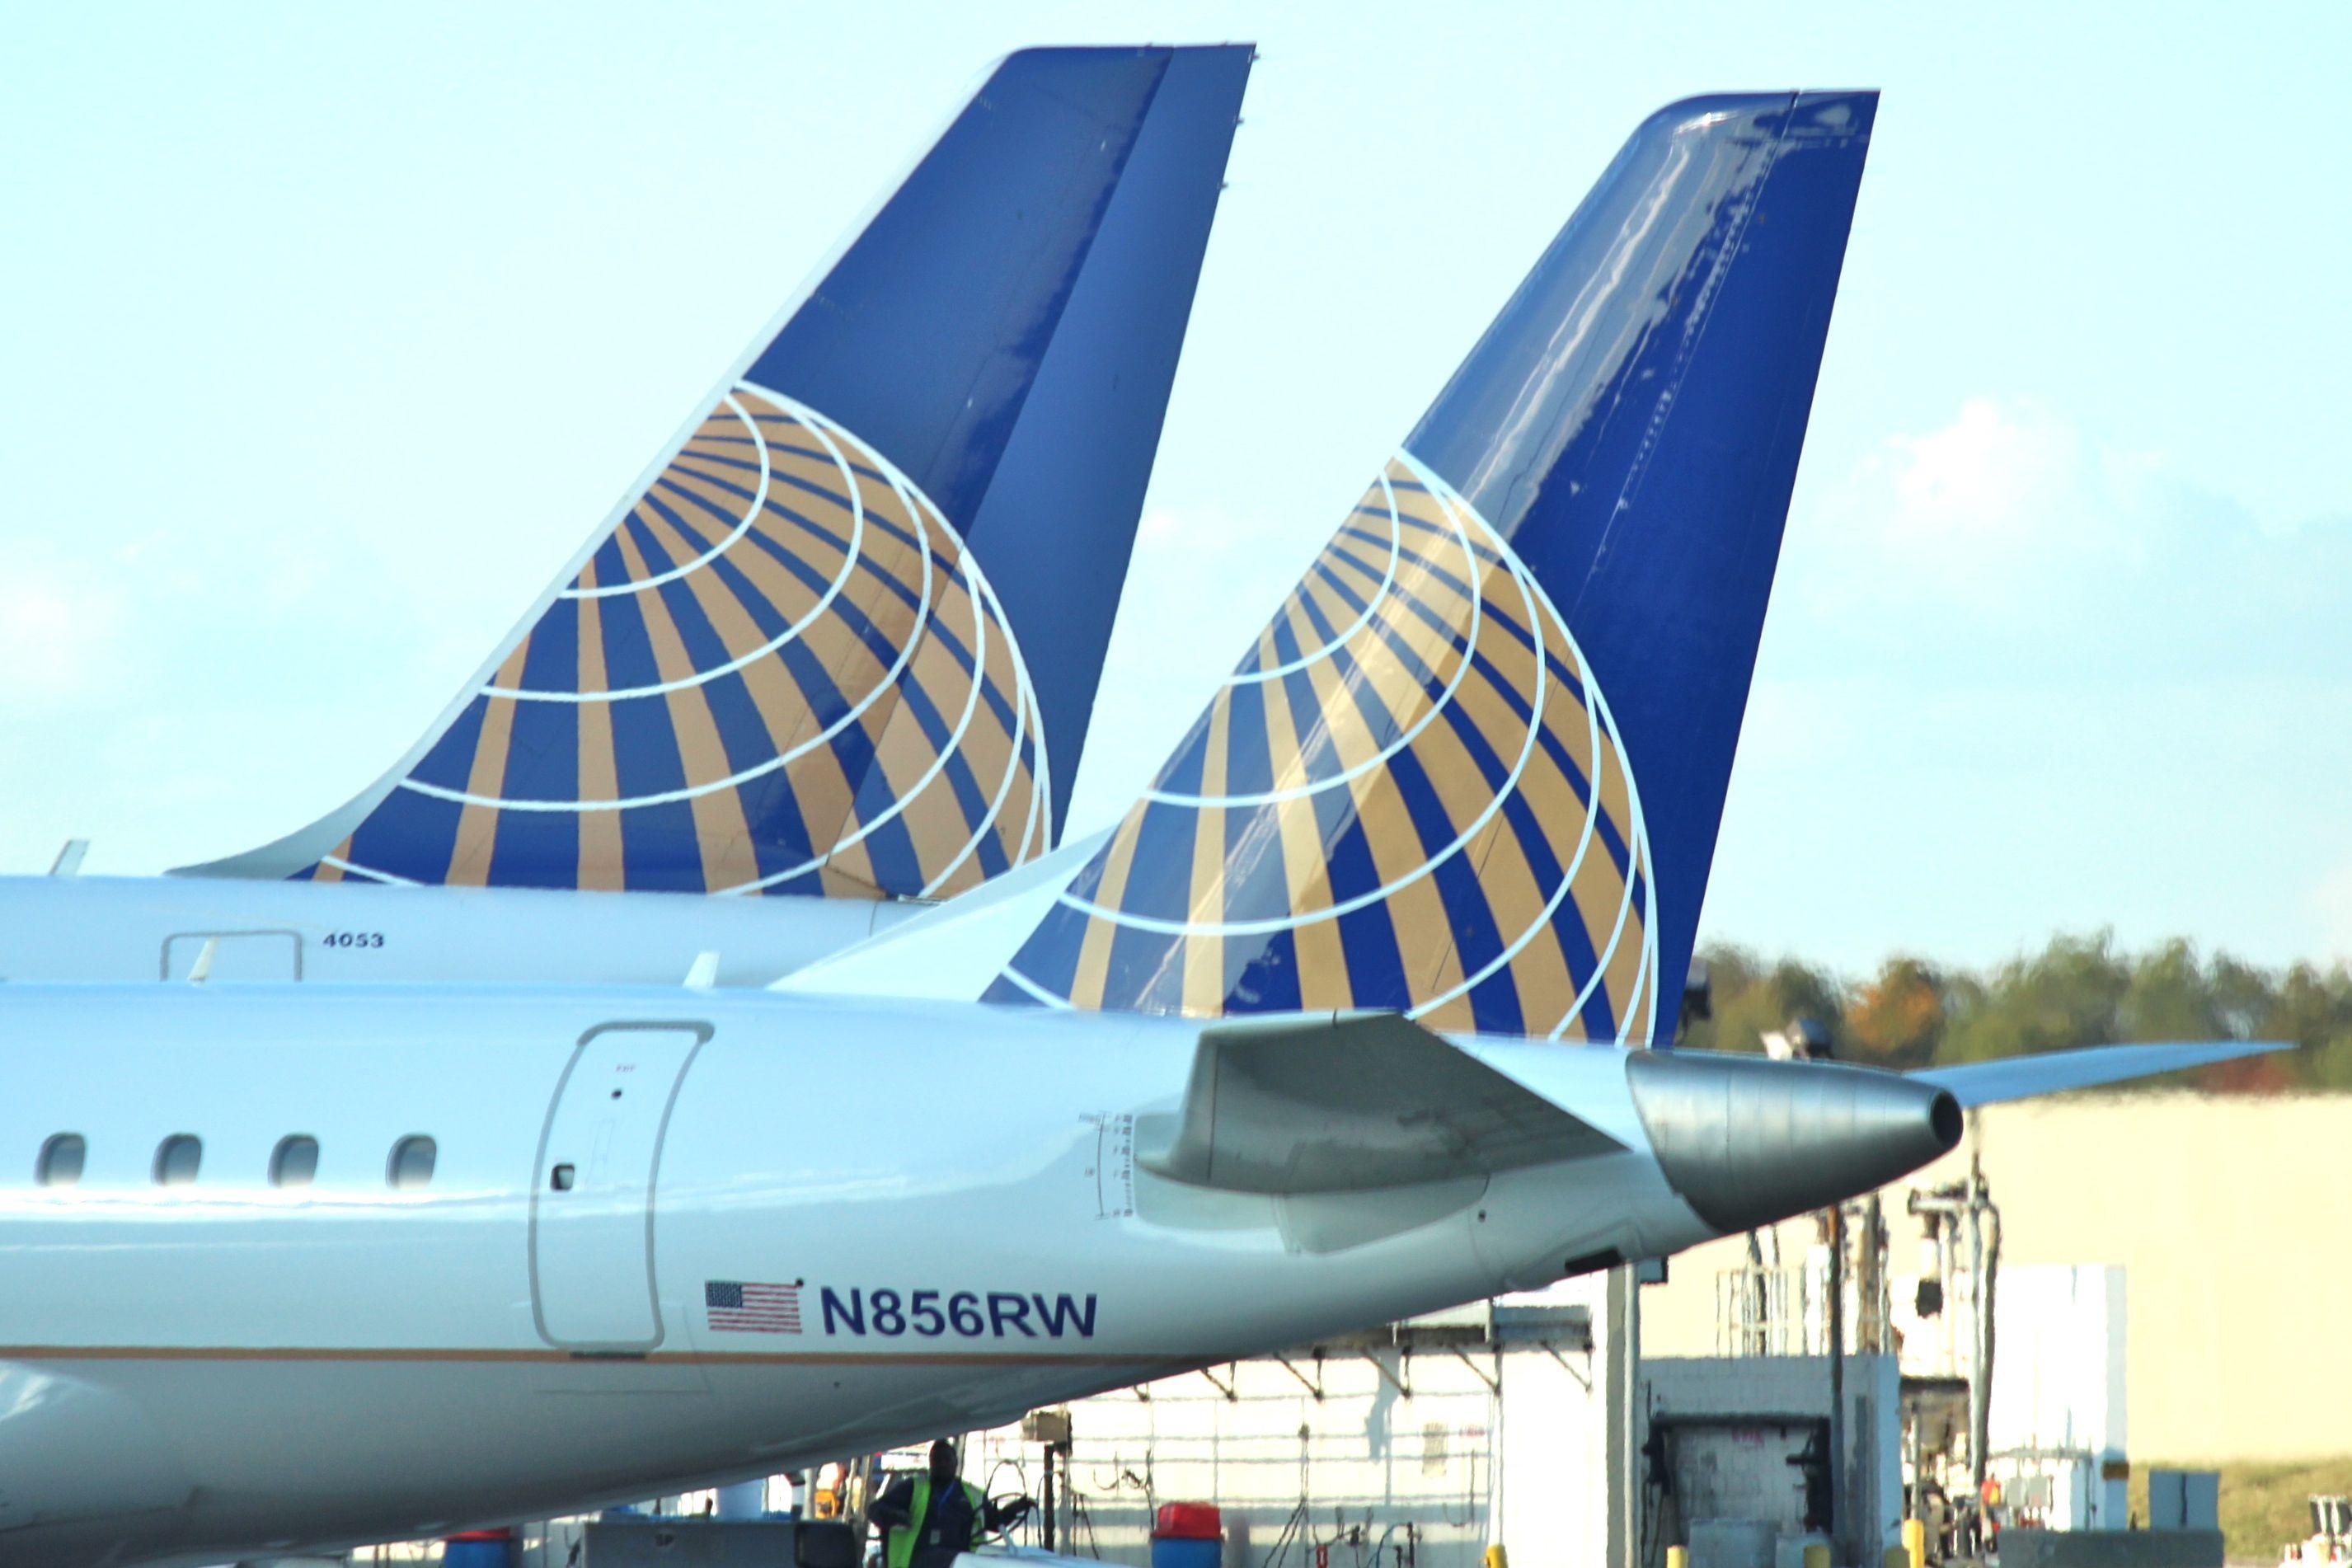 Globe Aviation Logo - 6 Reasons Why United Should Re-introduce The “Tulip” | airlineguys